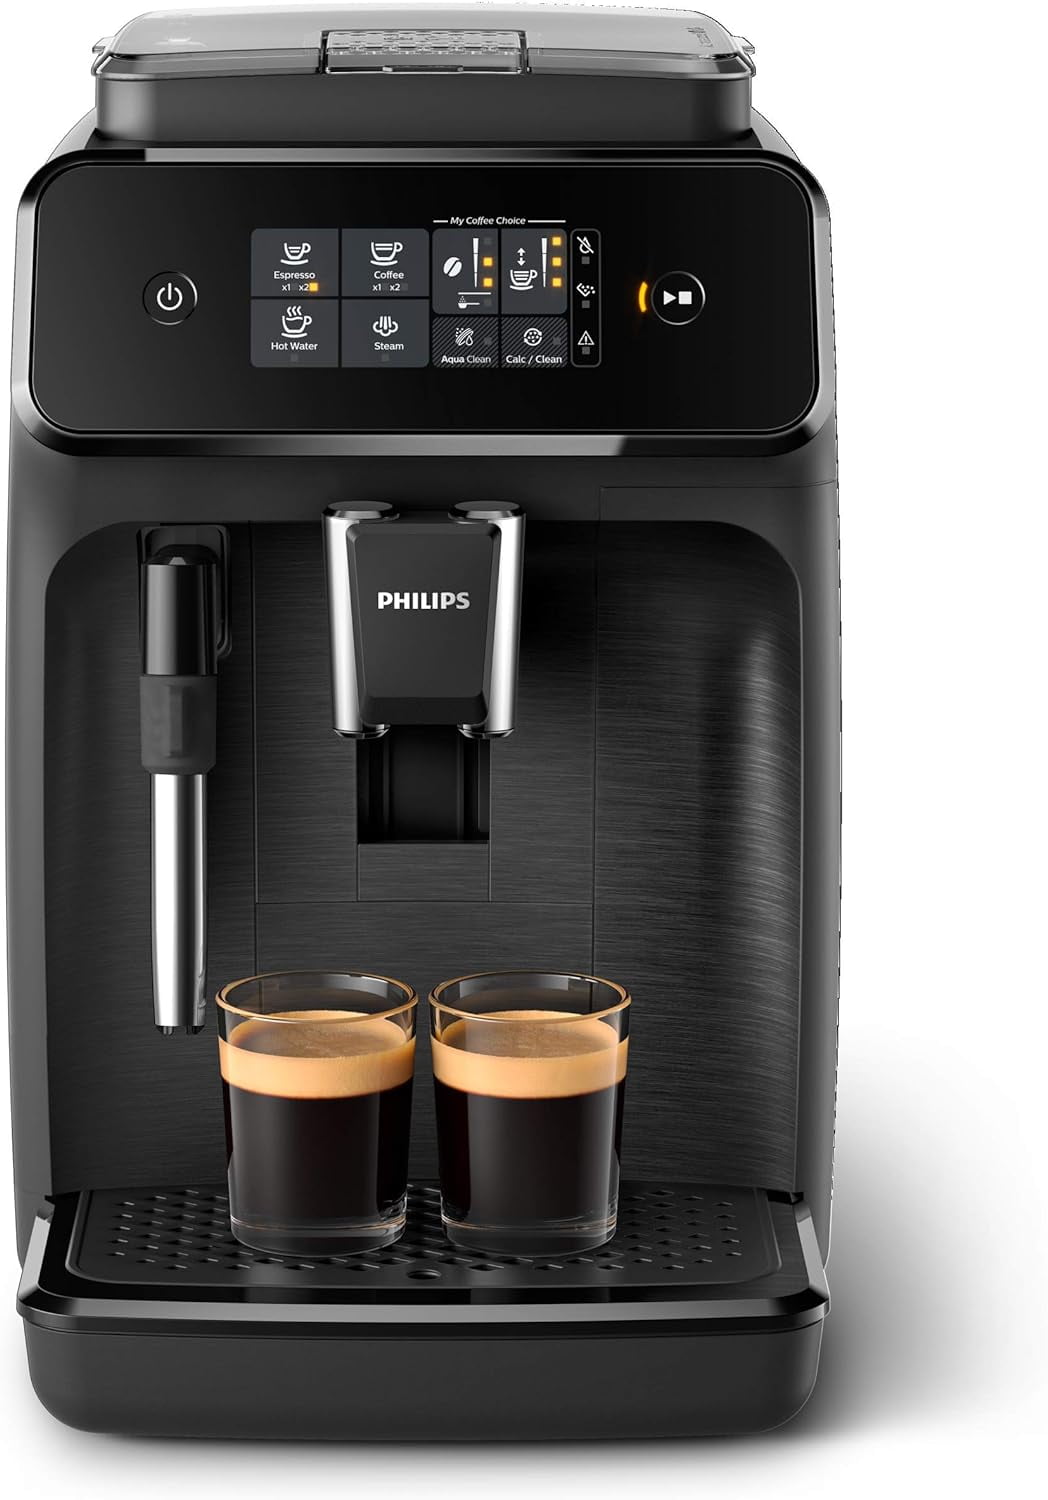 Philips 1200 Series Fully Automatic Espresso Machine w/ Milk Frother, Black  (EP1220/04)